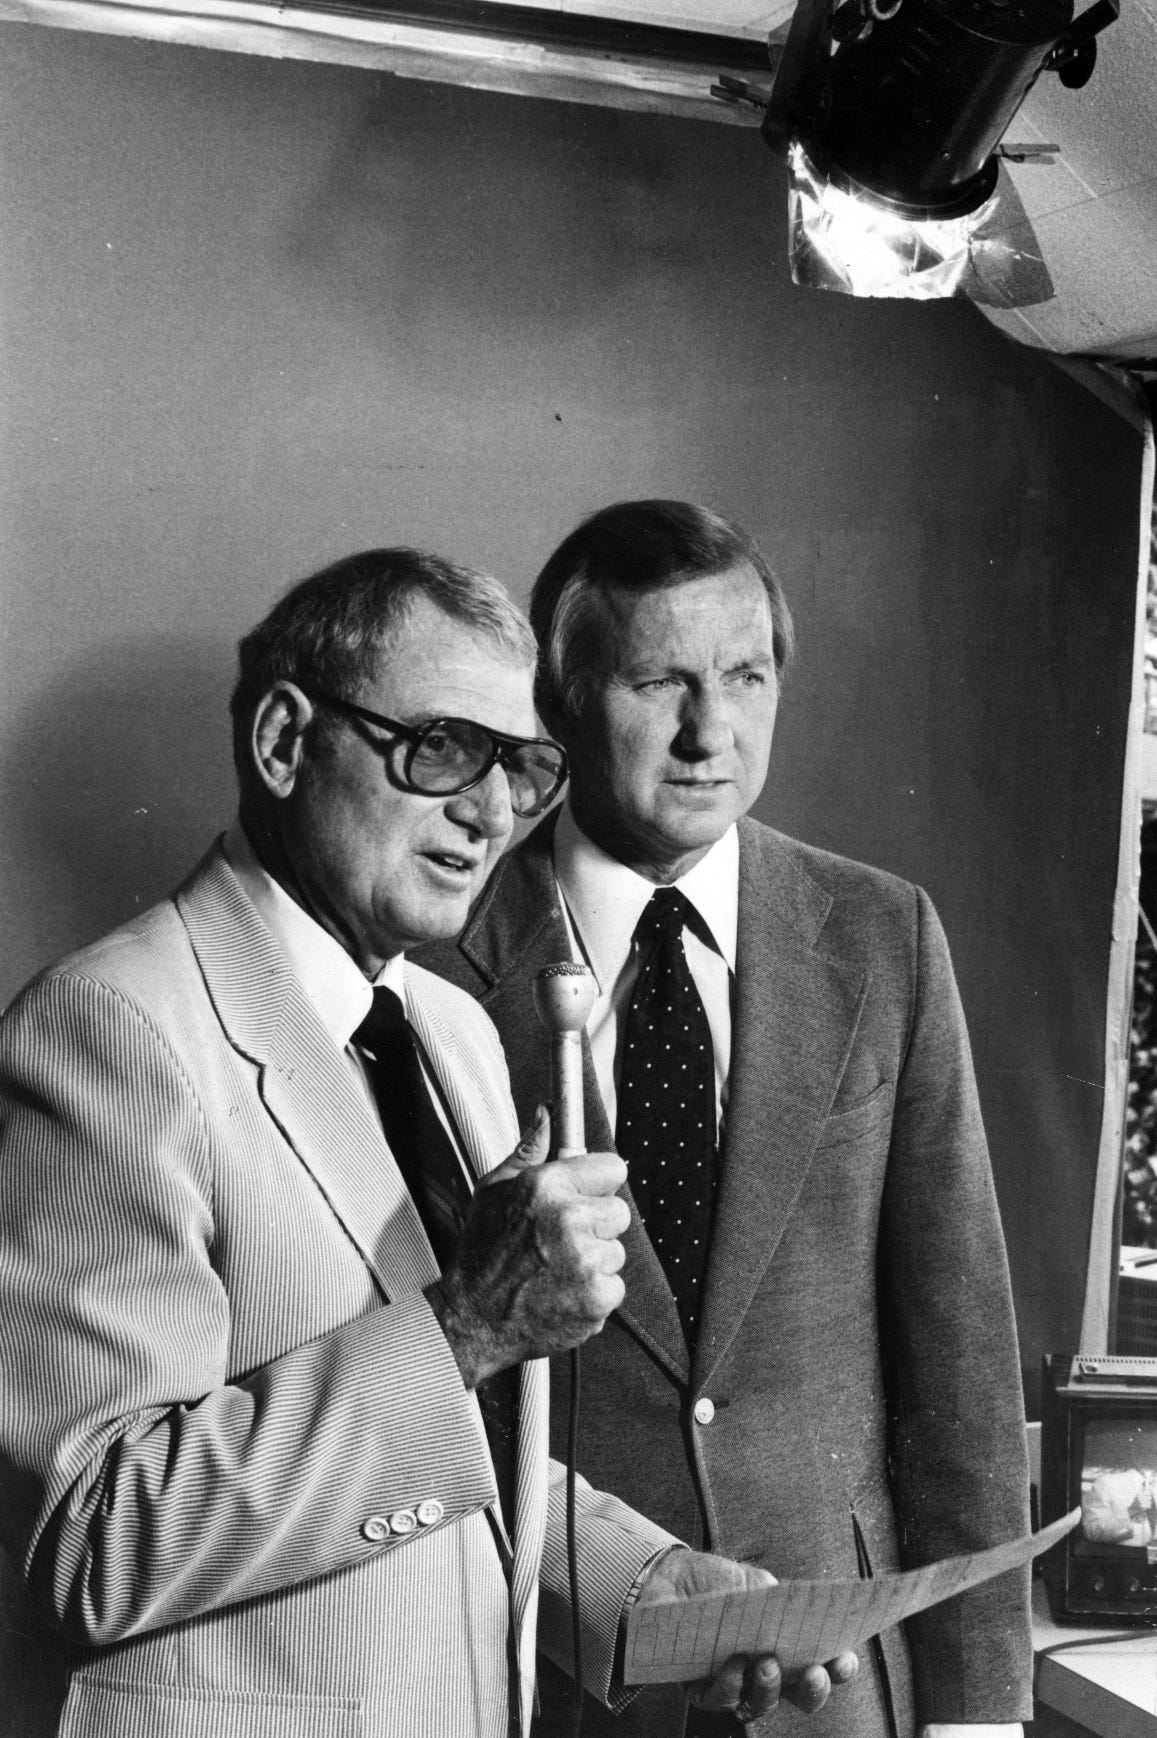 George Kell, left, and Al Kaline are seen in the television broadcast booth on Sept. 2, 1980.